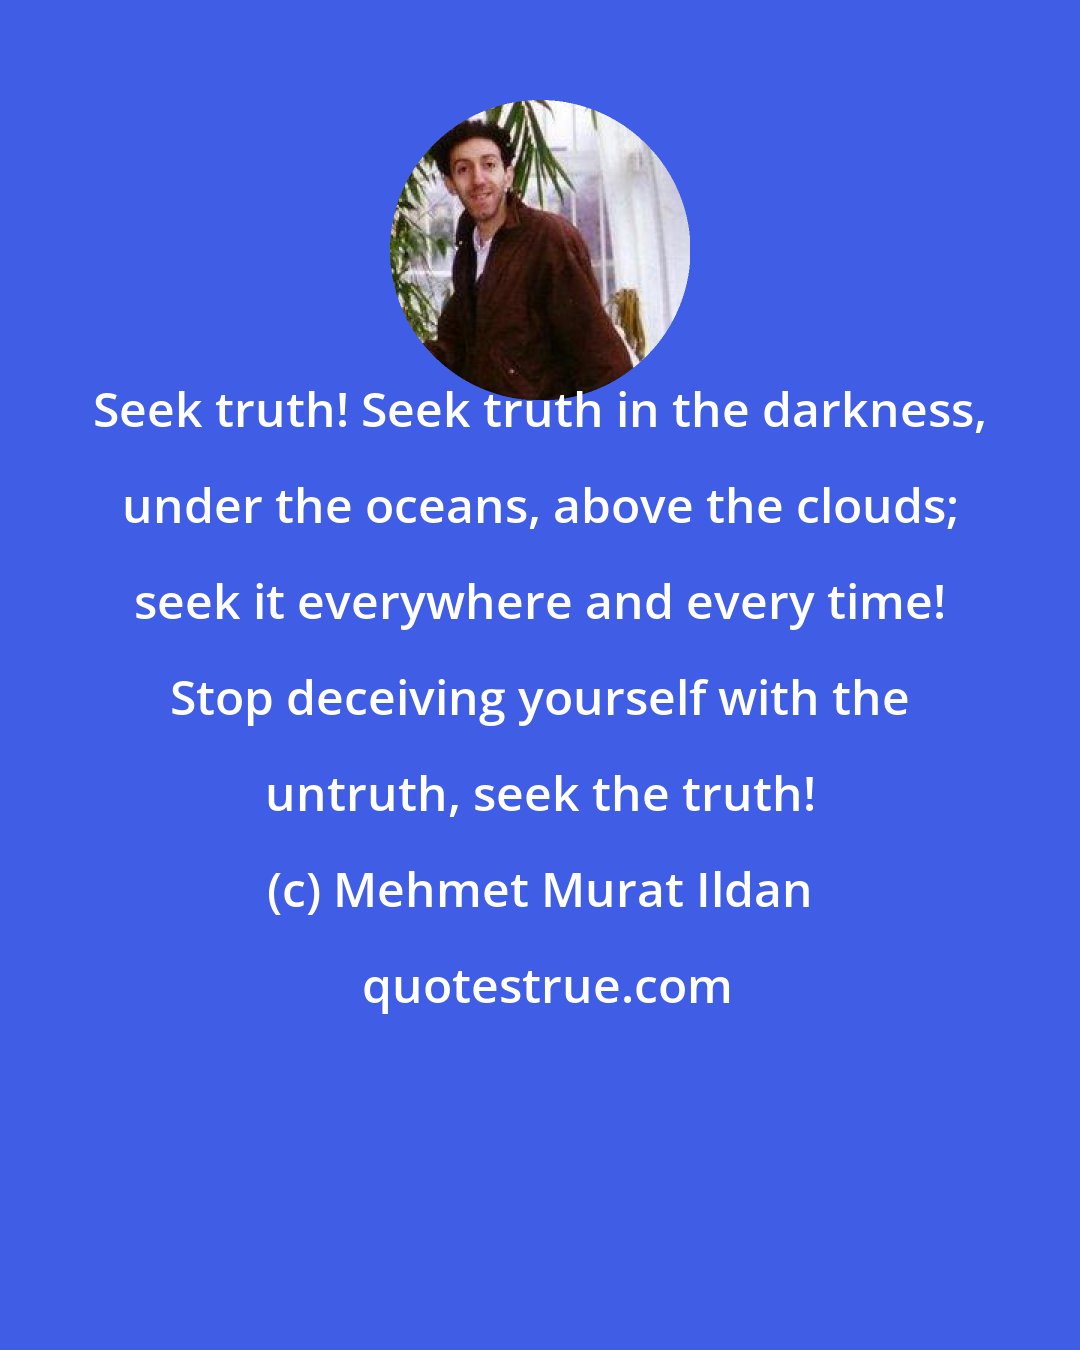 Mehmet Murat Ildan: Seek truth! Seek truth in the darkness, under the oceans, above the clouds; seek it everywhere and every time! Stop deceiving yourself with the untruth, seek the truth!